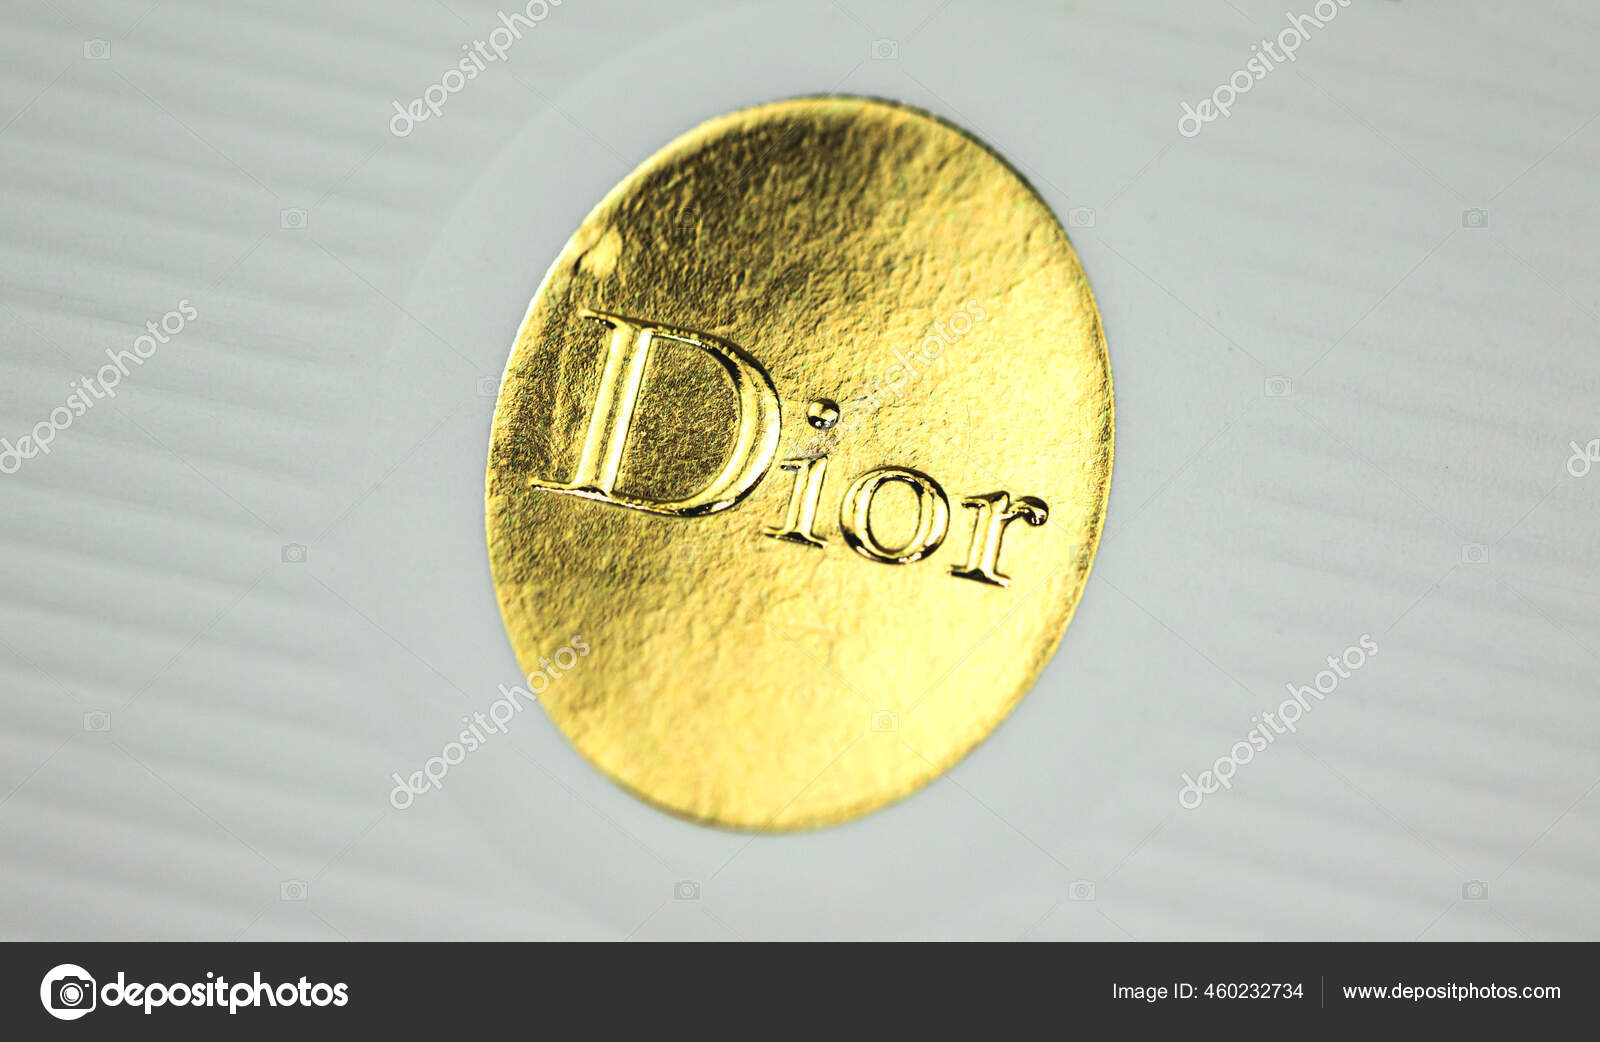 CHRISTIAN DIOR Authentic Vintage Gold Plated Brooch  Etsy UK  Dior  Christian Christian dior